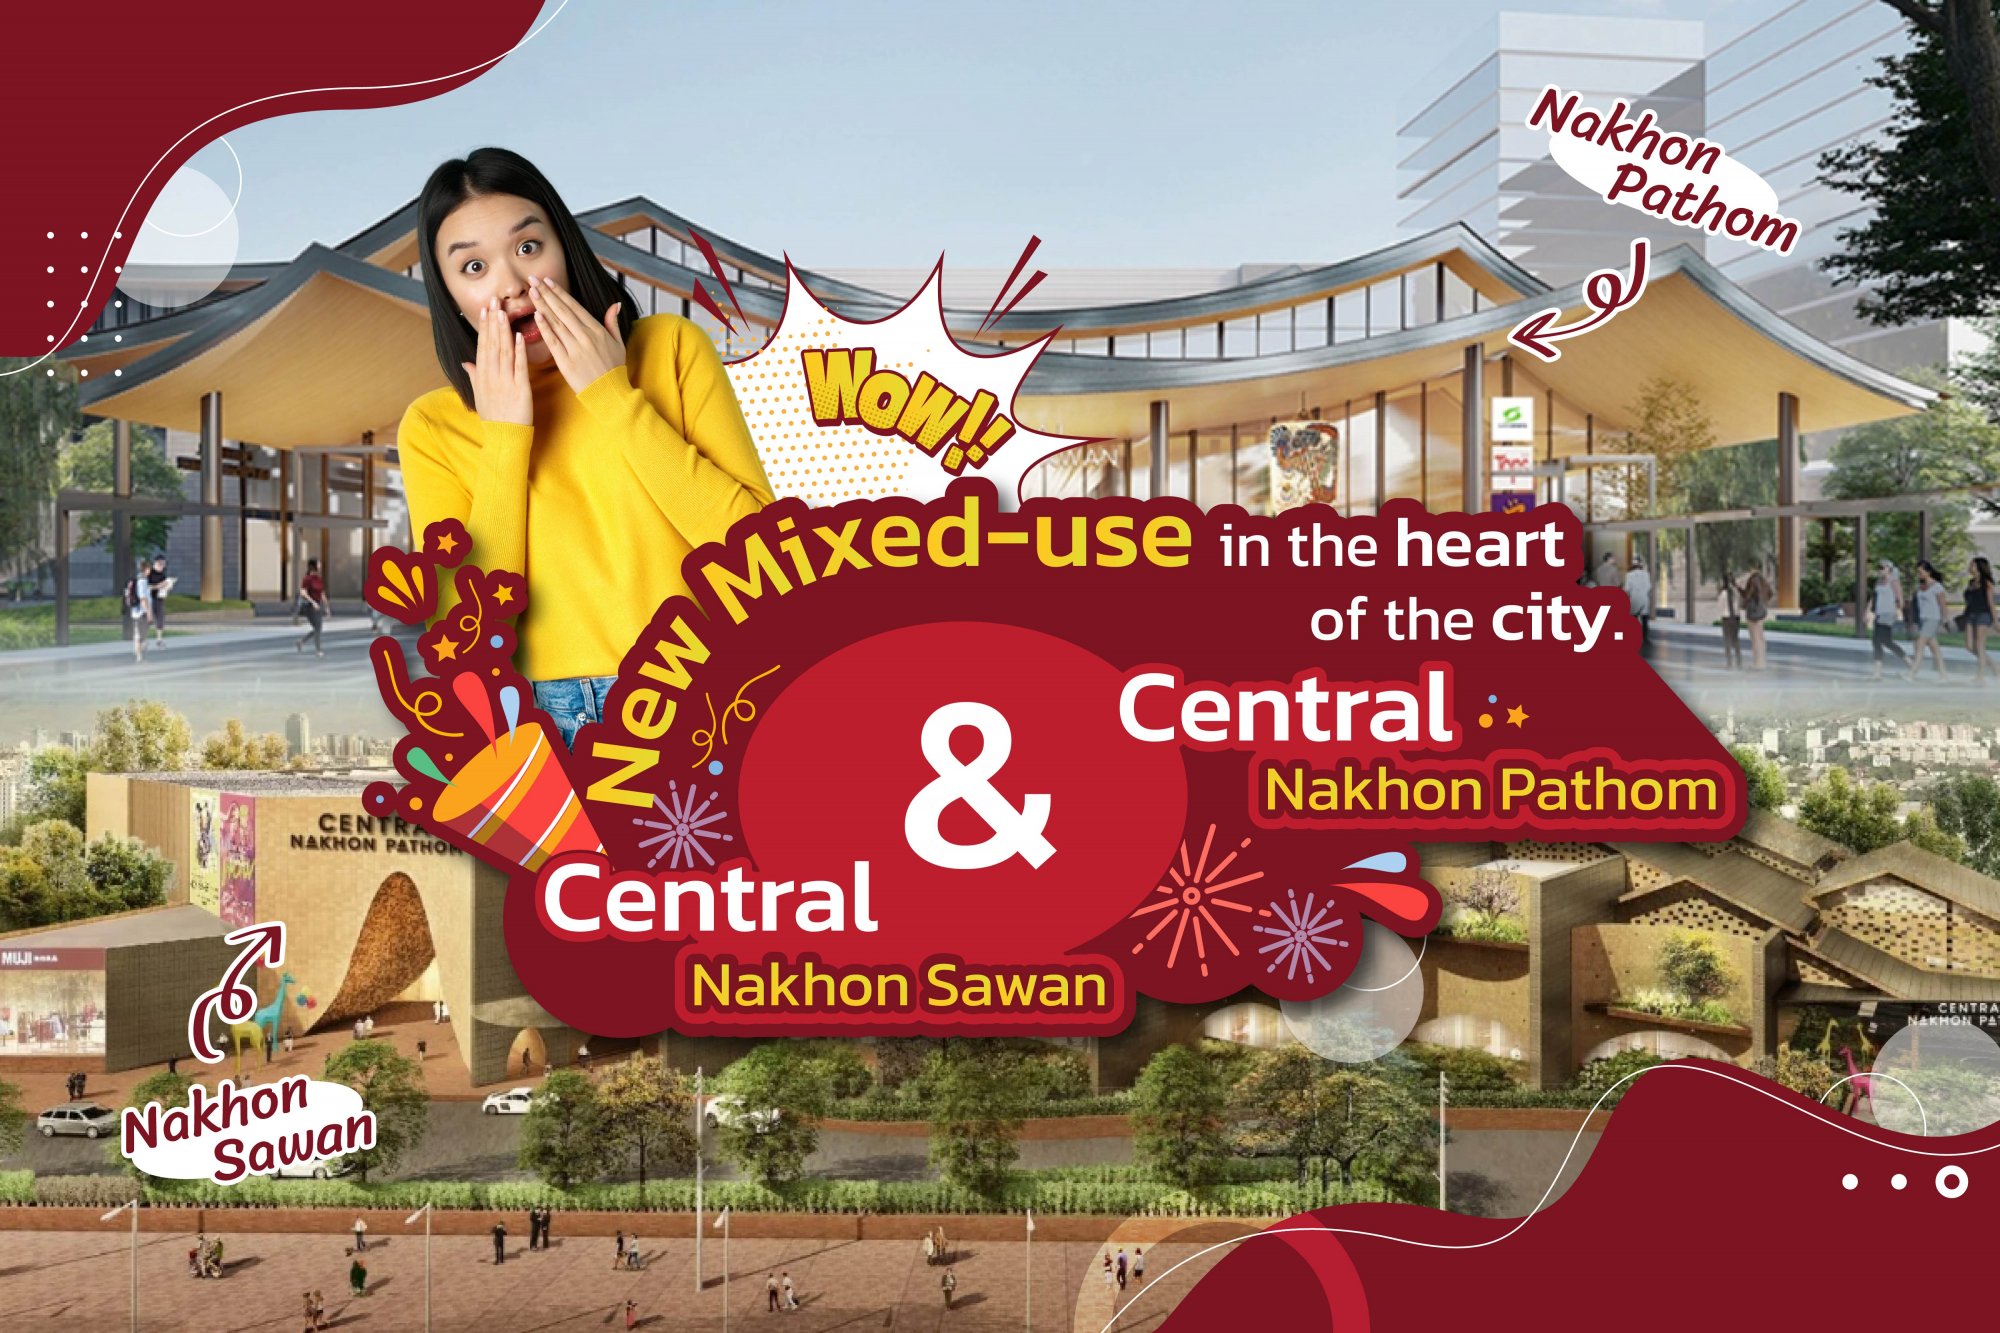 image for Explore the new Miexd-use in the heart of the city, Central Nakhon Pathom & Central Nakhon Sawan.